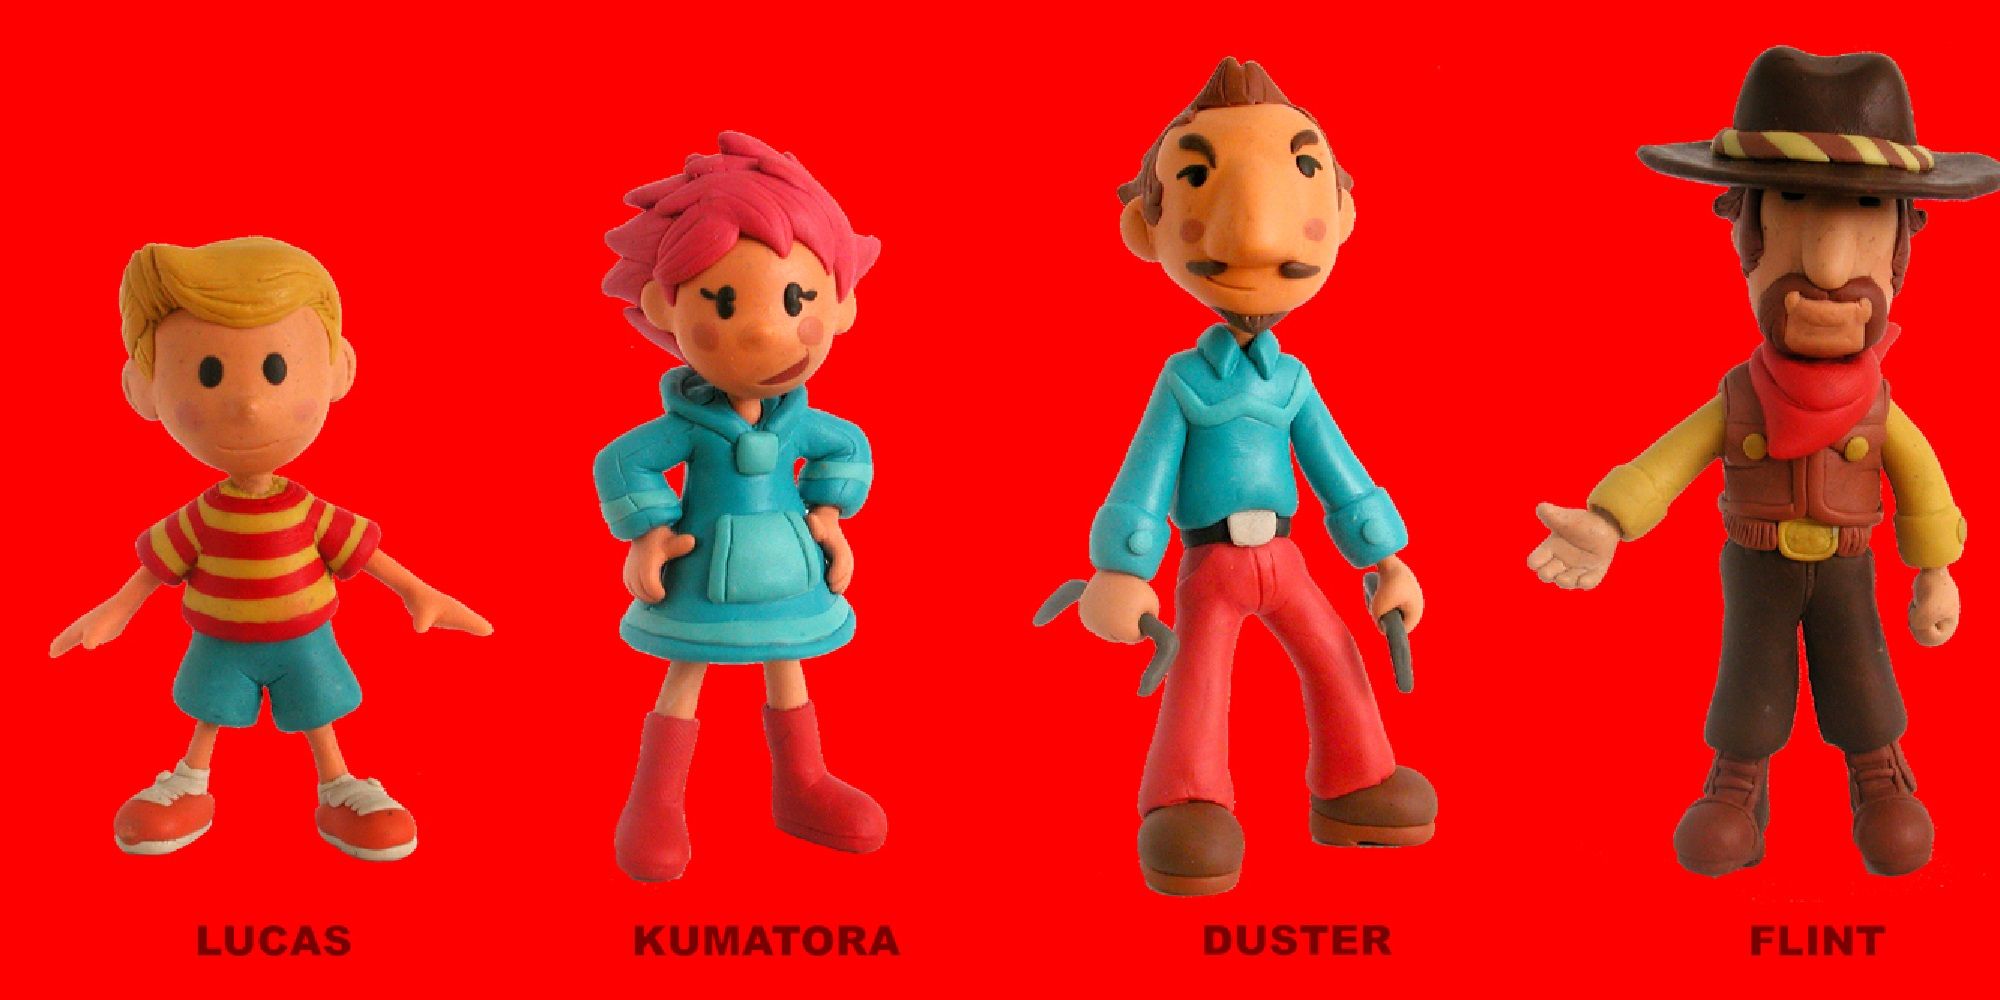 Clay figures of Lucas, Kumatora, Dusty, and Flint from Mother 3